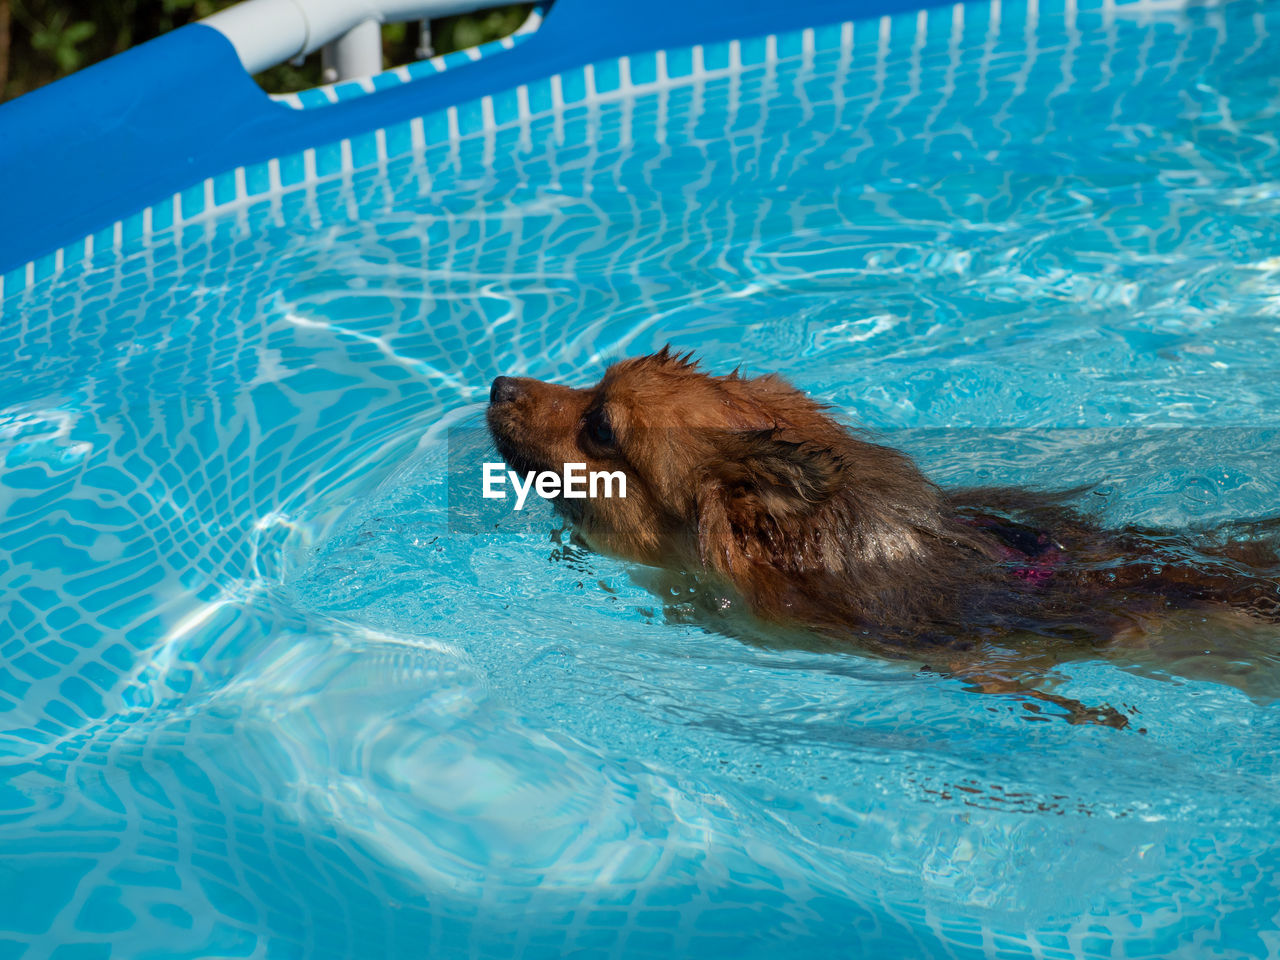 swimming, water, animal themes, animal, mammal, swimming pool, one animal, nature, animal wildlife, dog, day, no people, wildlife, blue, underwater, high angle view, outdoors, pet, wet, domestic animals, canine, carnivore, rippled